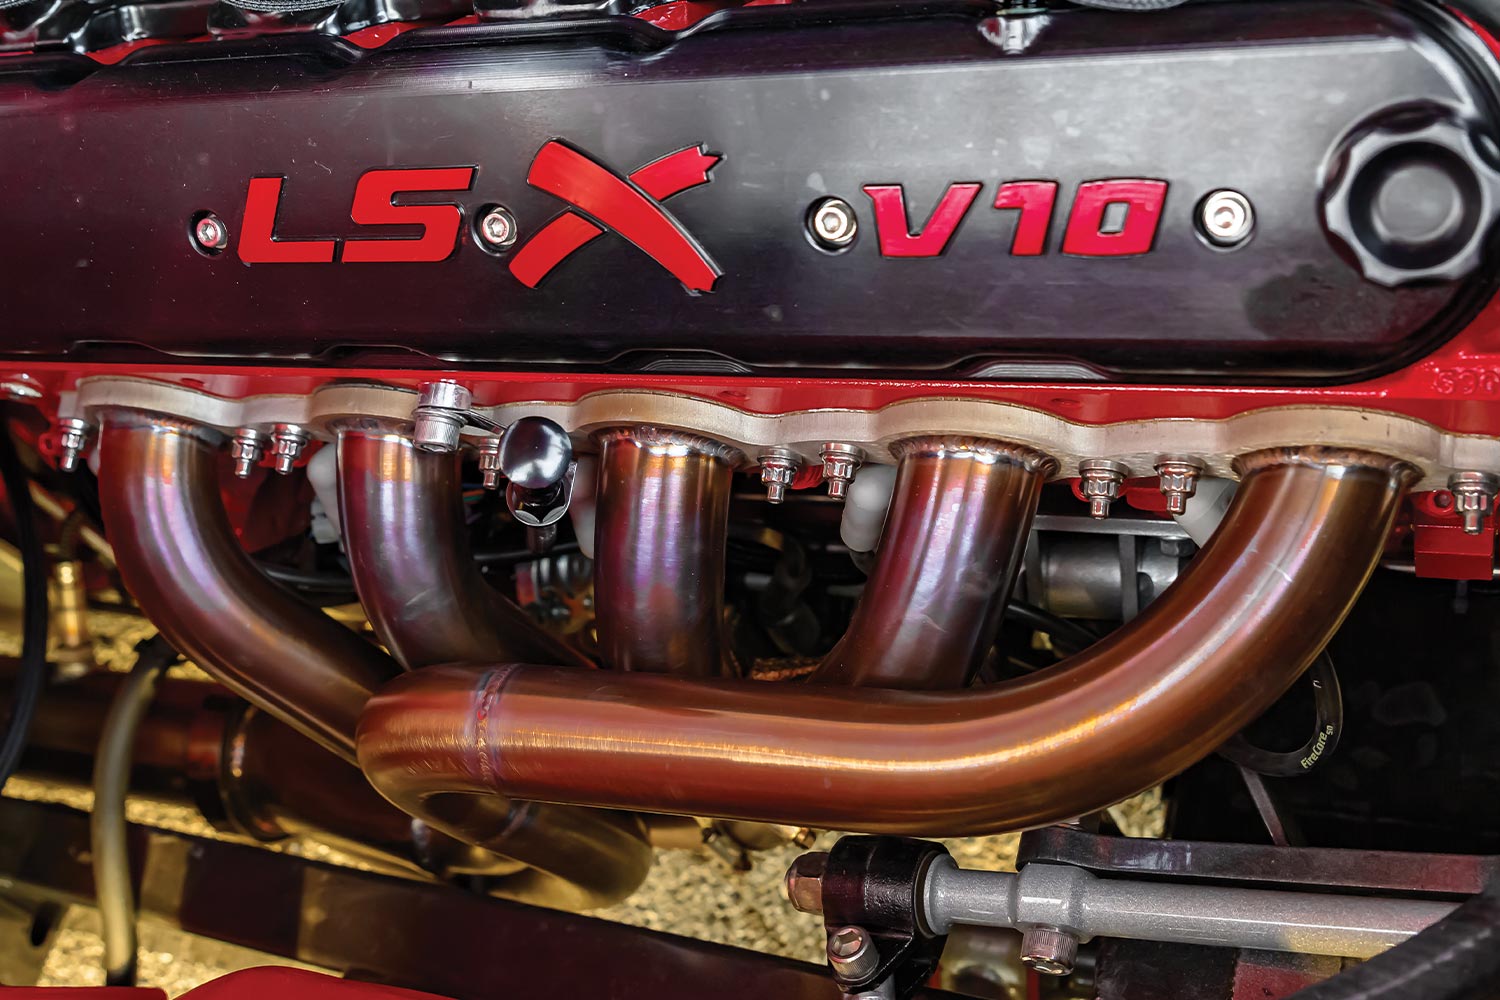 close view of the engine valve cover with LS X V10 embossed in red